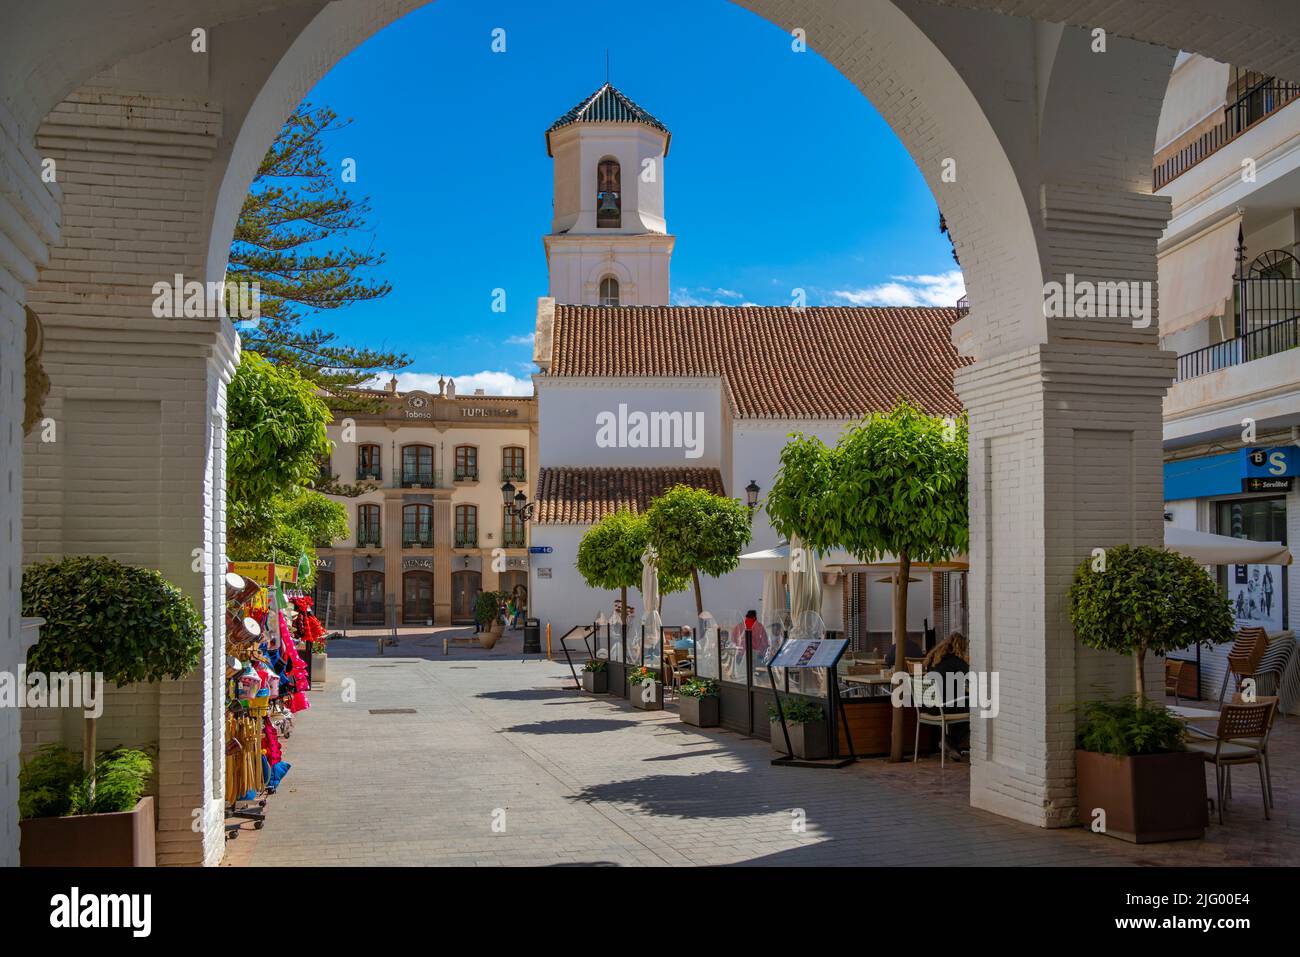 View of Iglesia de El Salvador Church in the old town of Nerja, Nerja, Costa del Sol, Malaga Province, Andalusia, Spain, Mediterranean, Europe Stock Photo